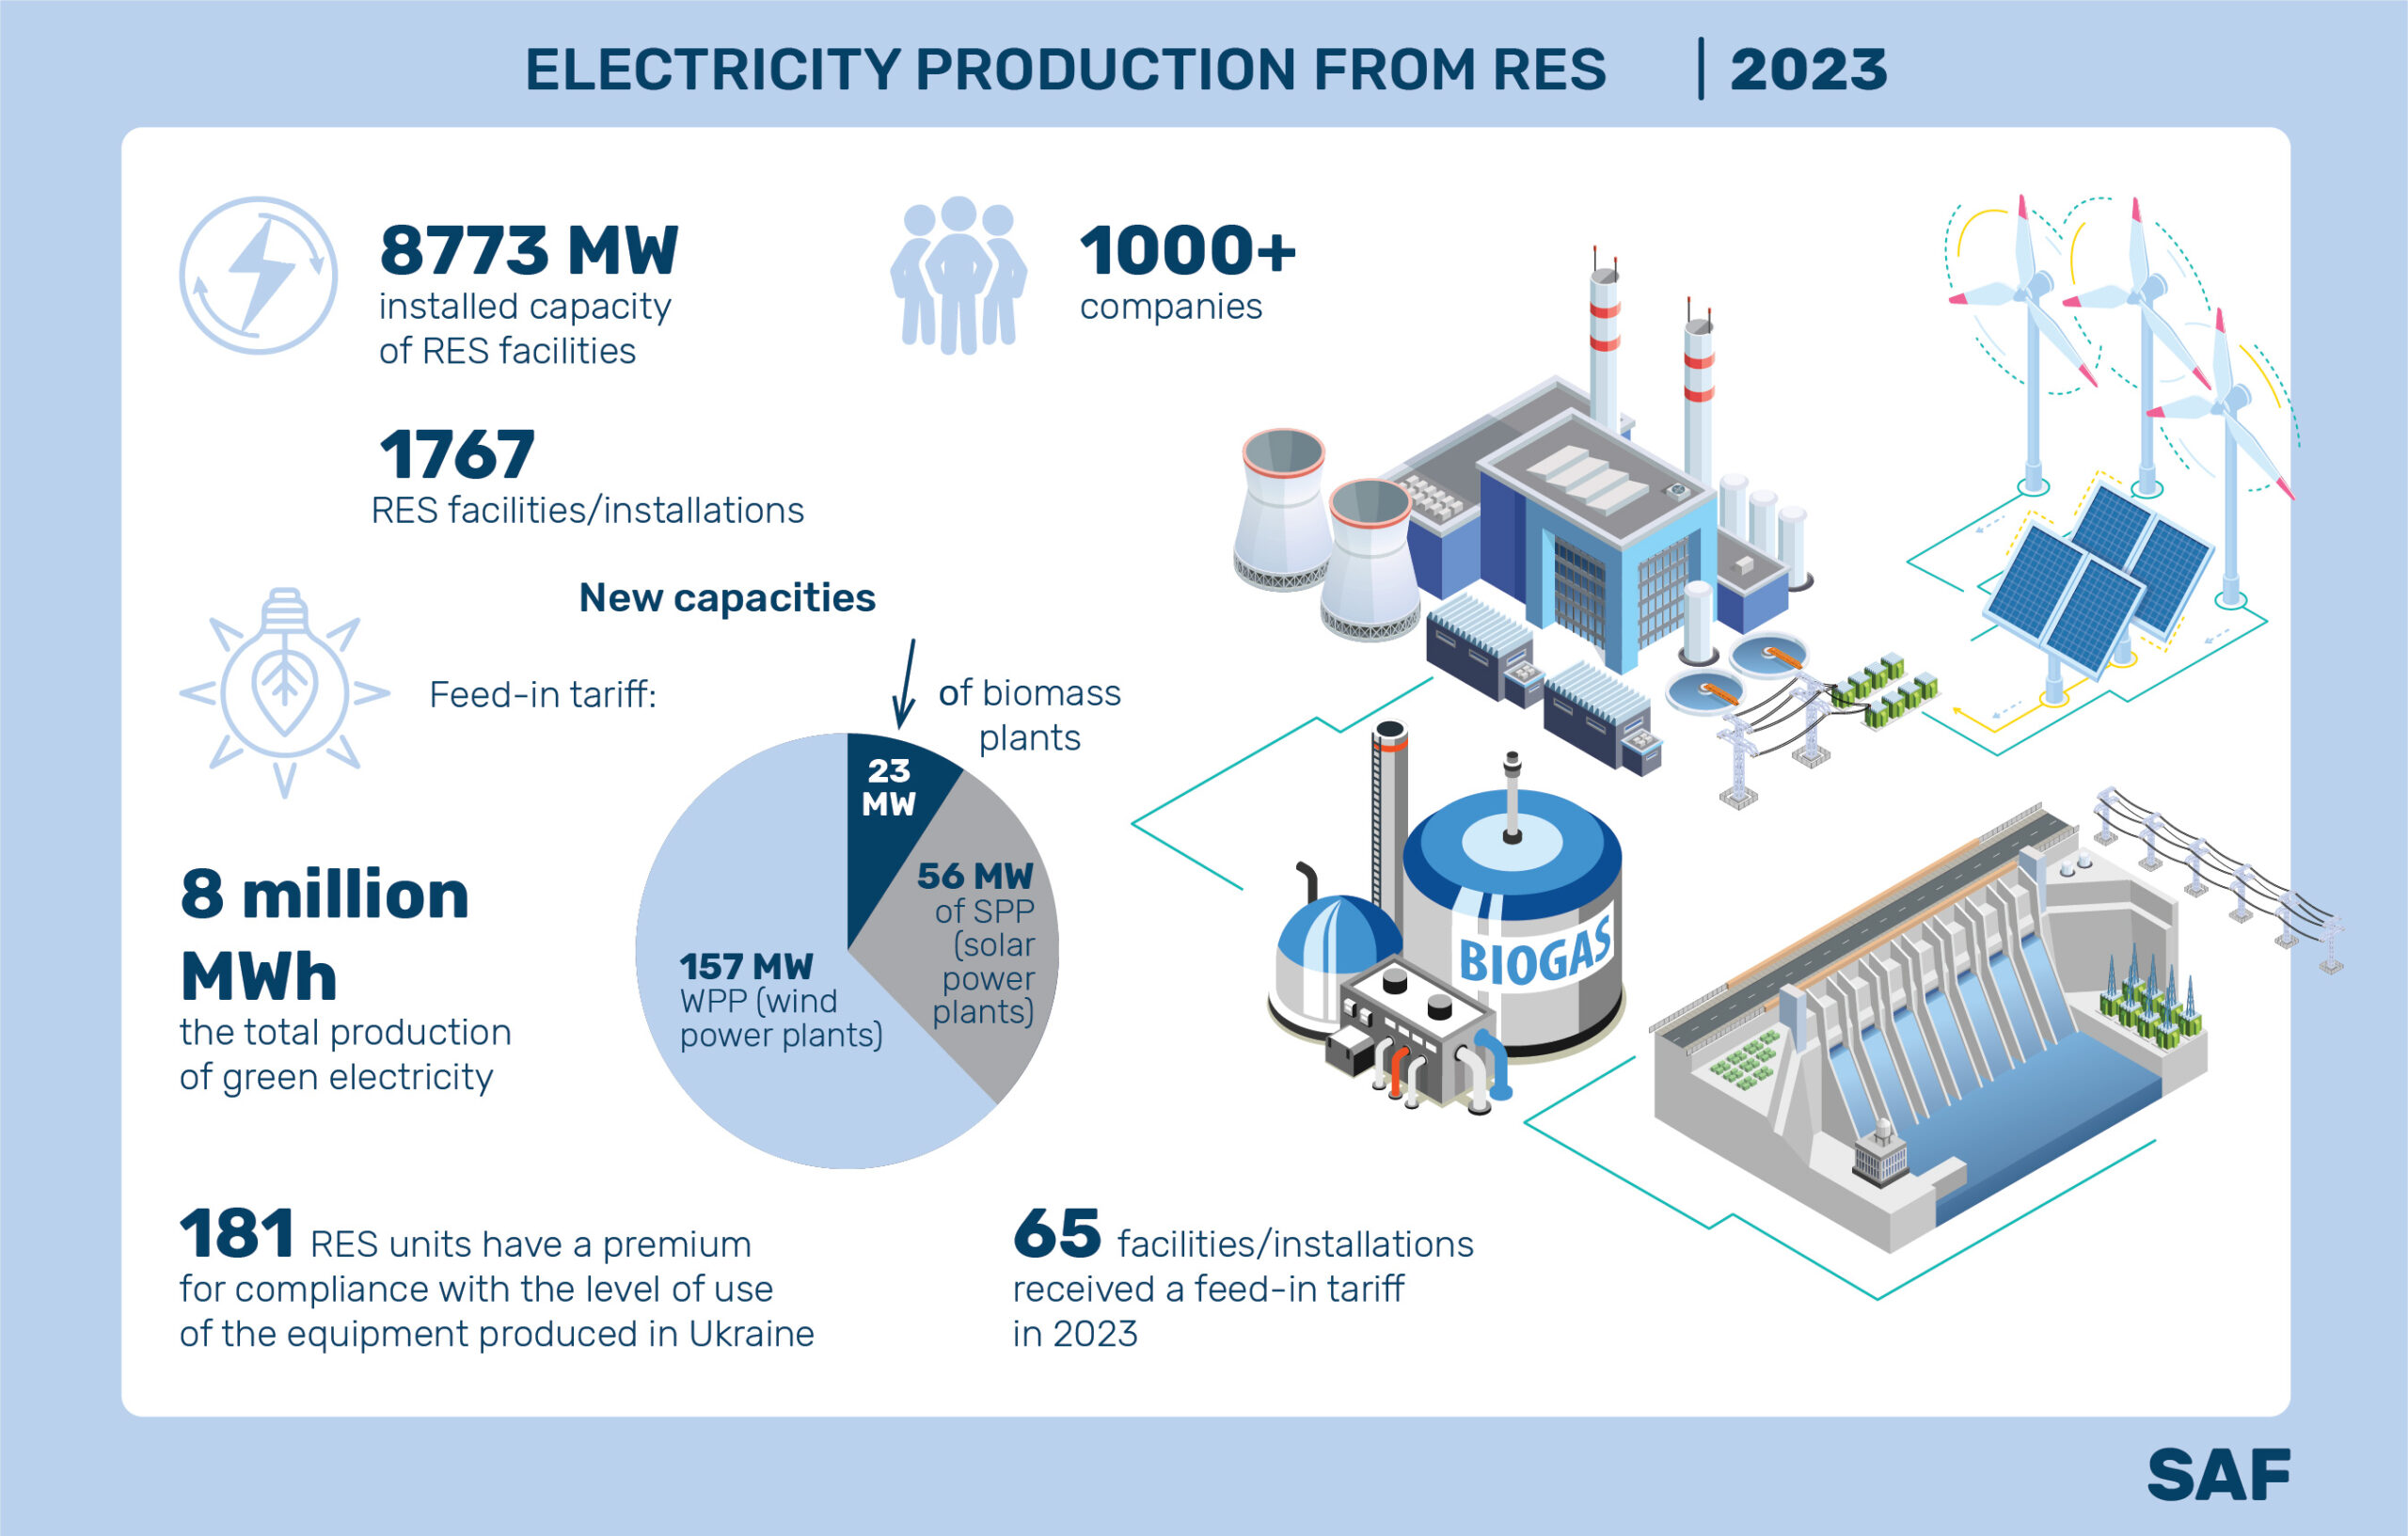 Electricity production from RES